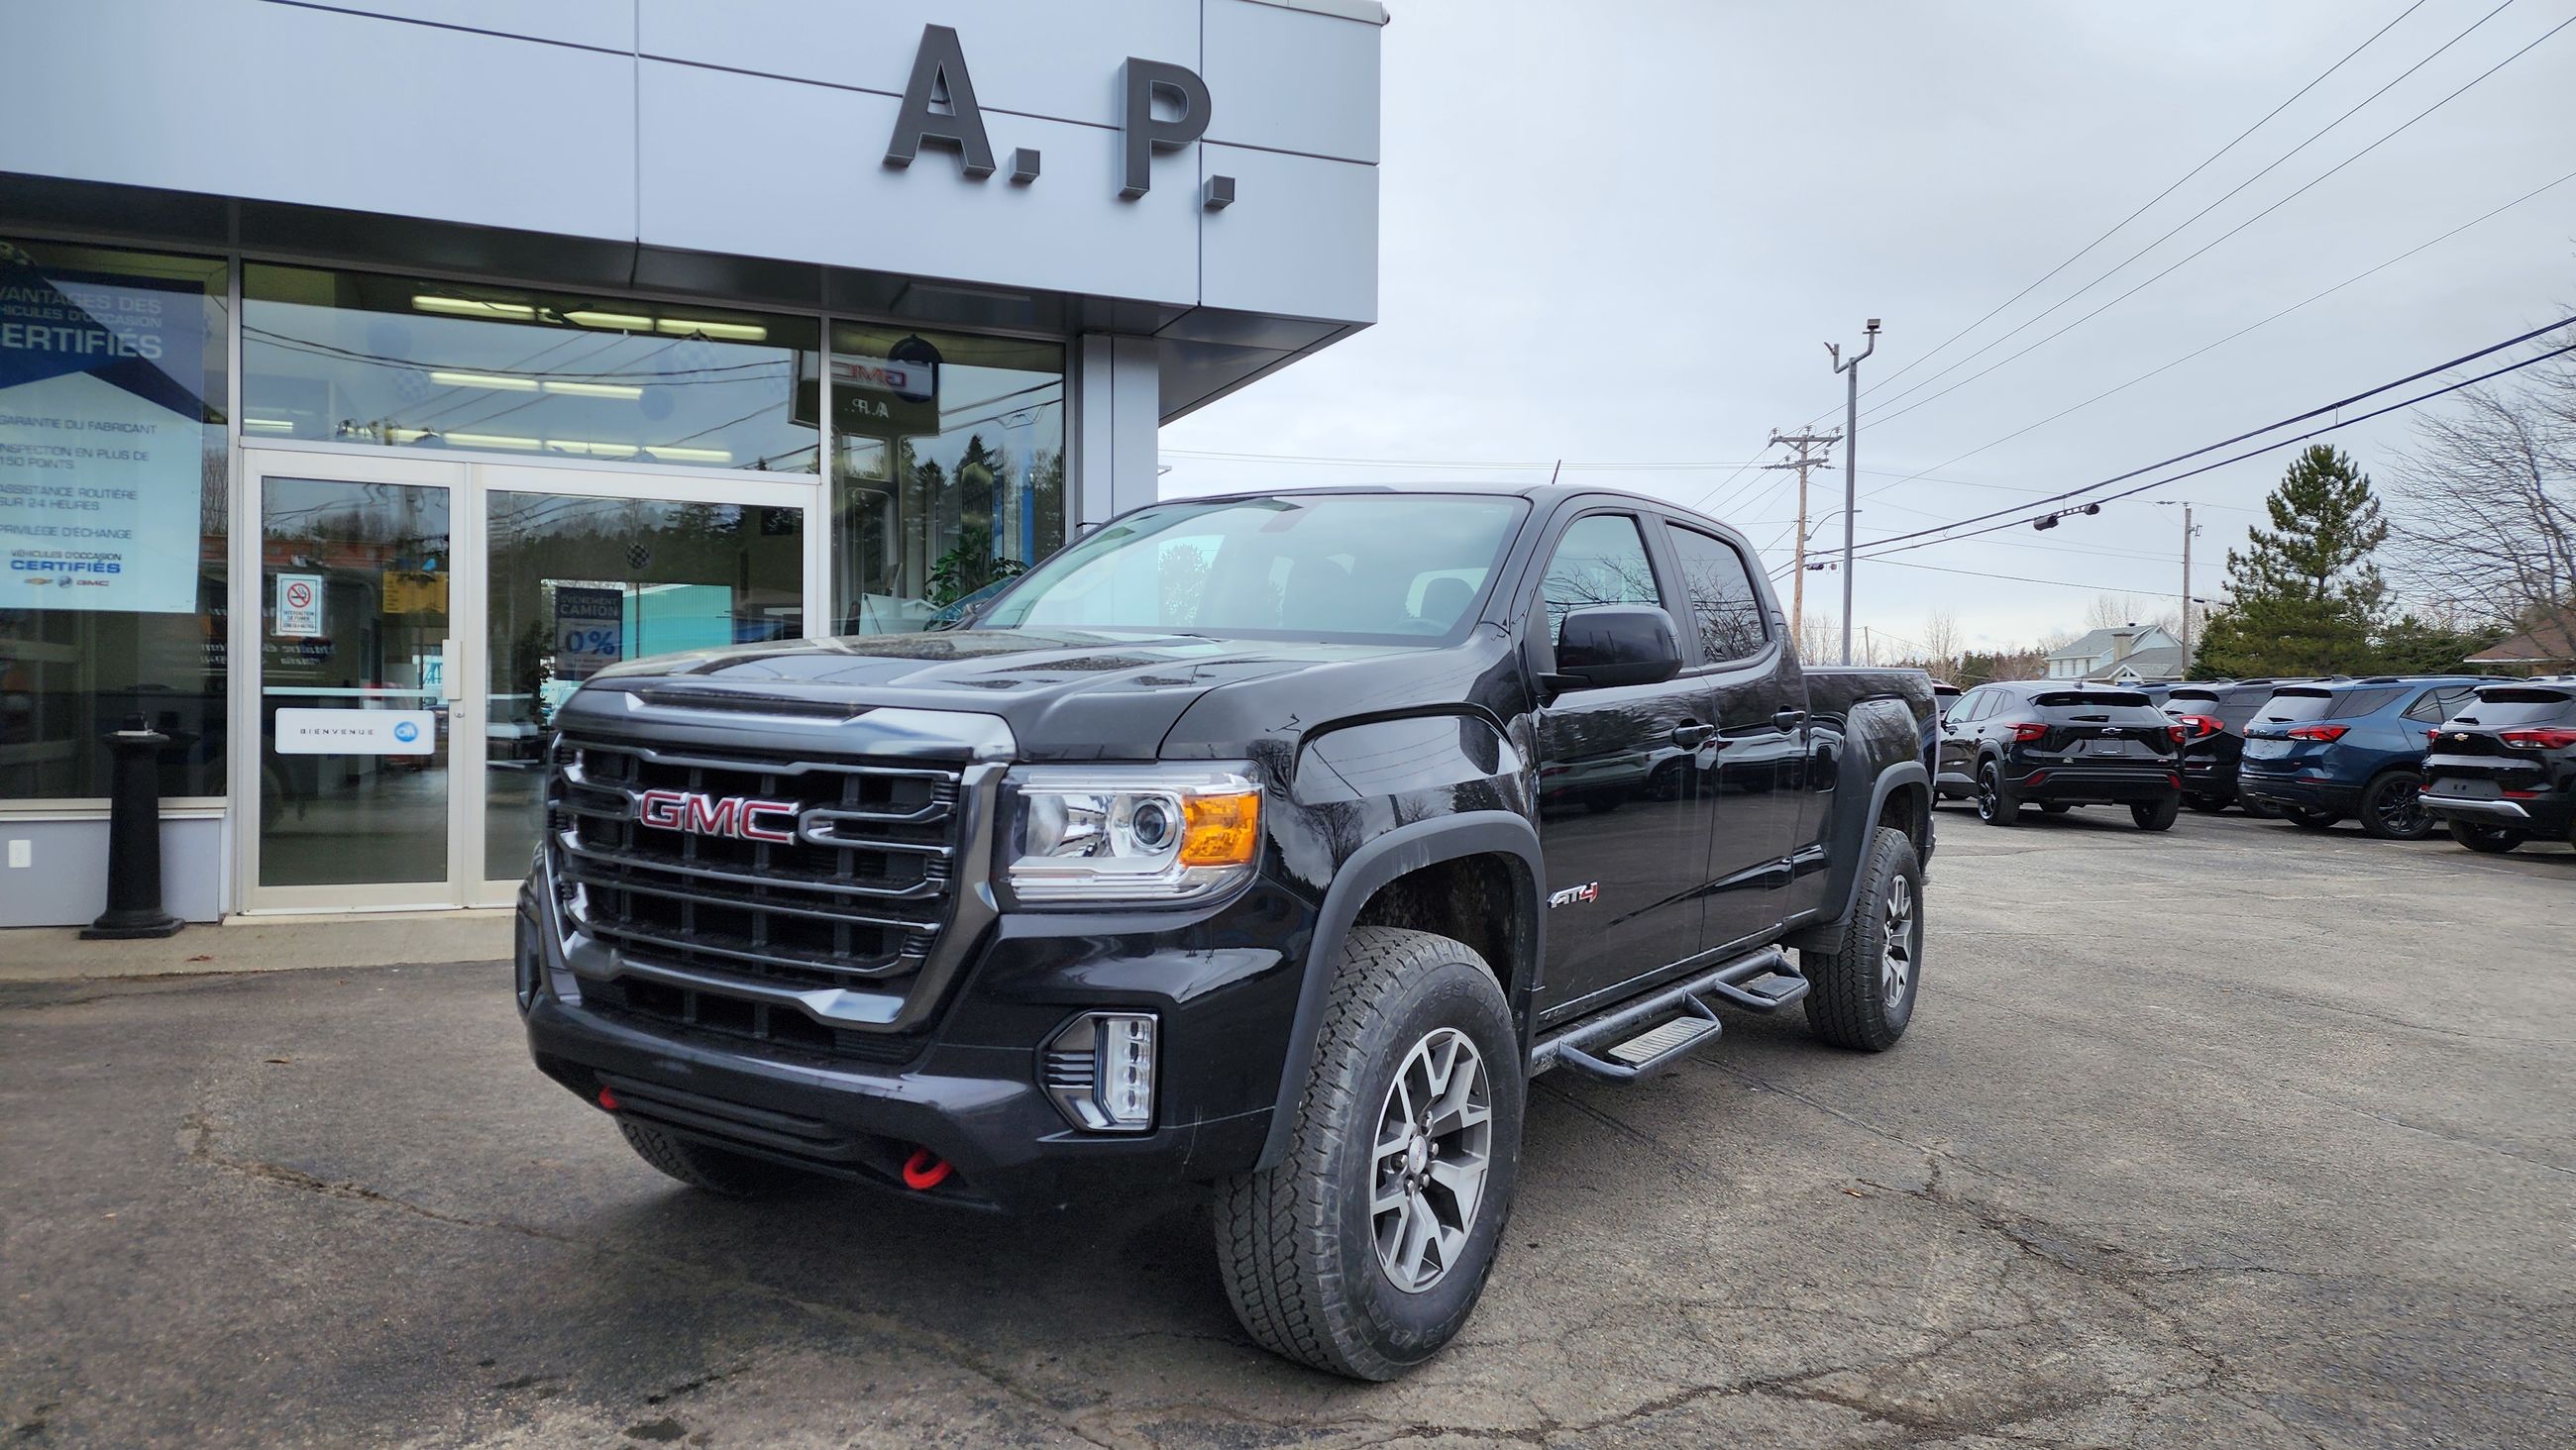 GMC Certified Vehicles in New Richmond | A.P. Chevrolet Buick GMC Inc.